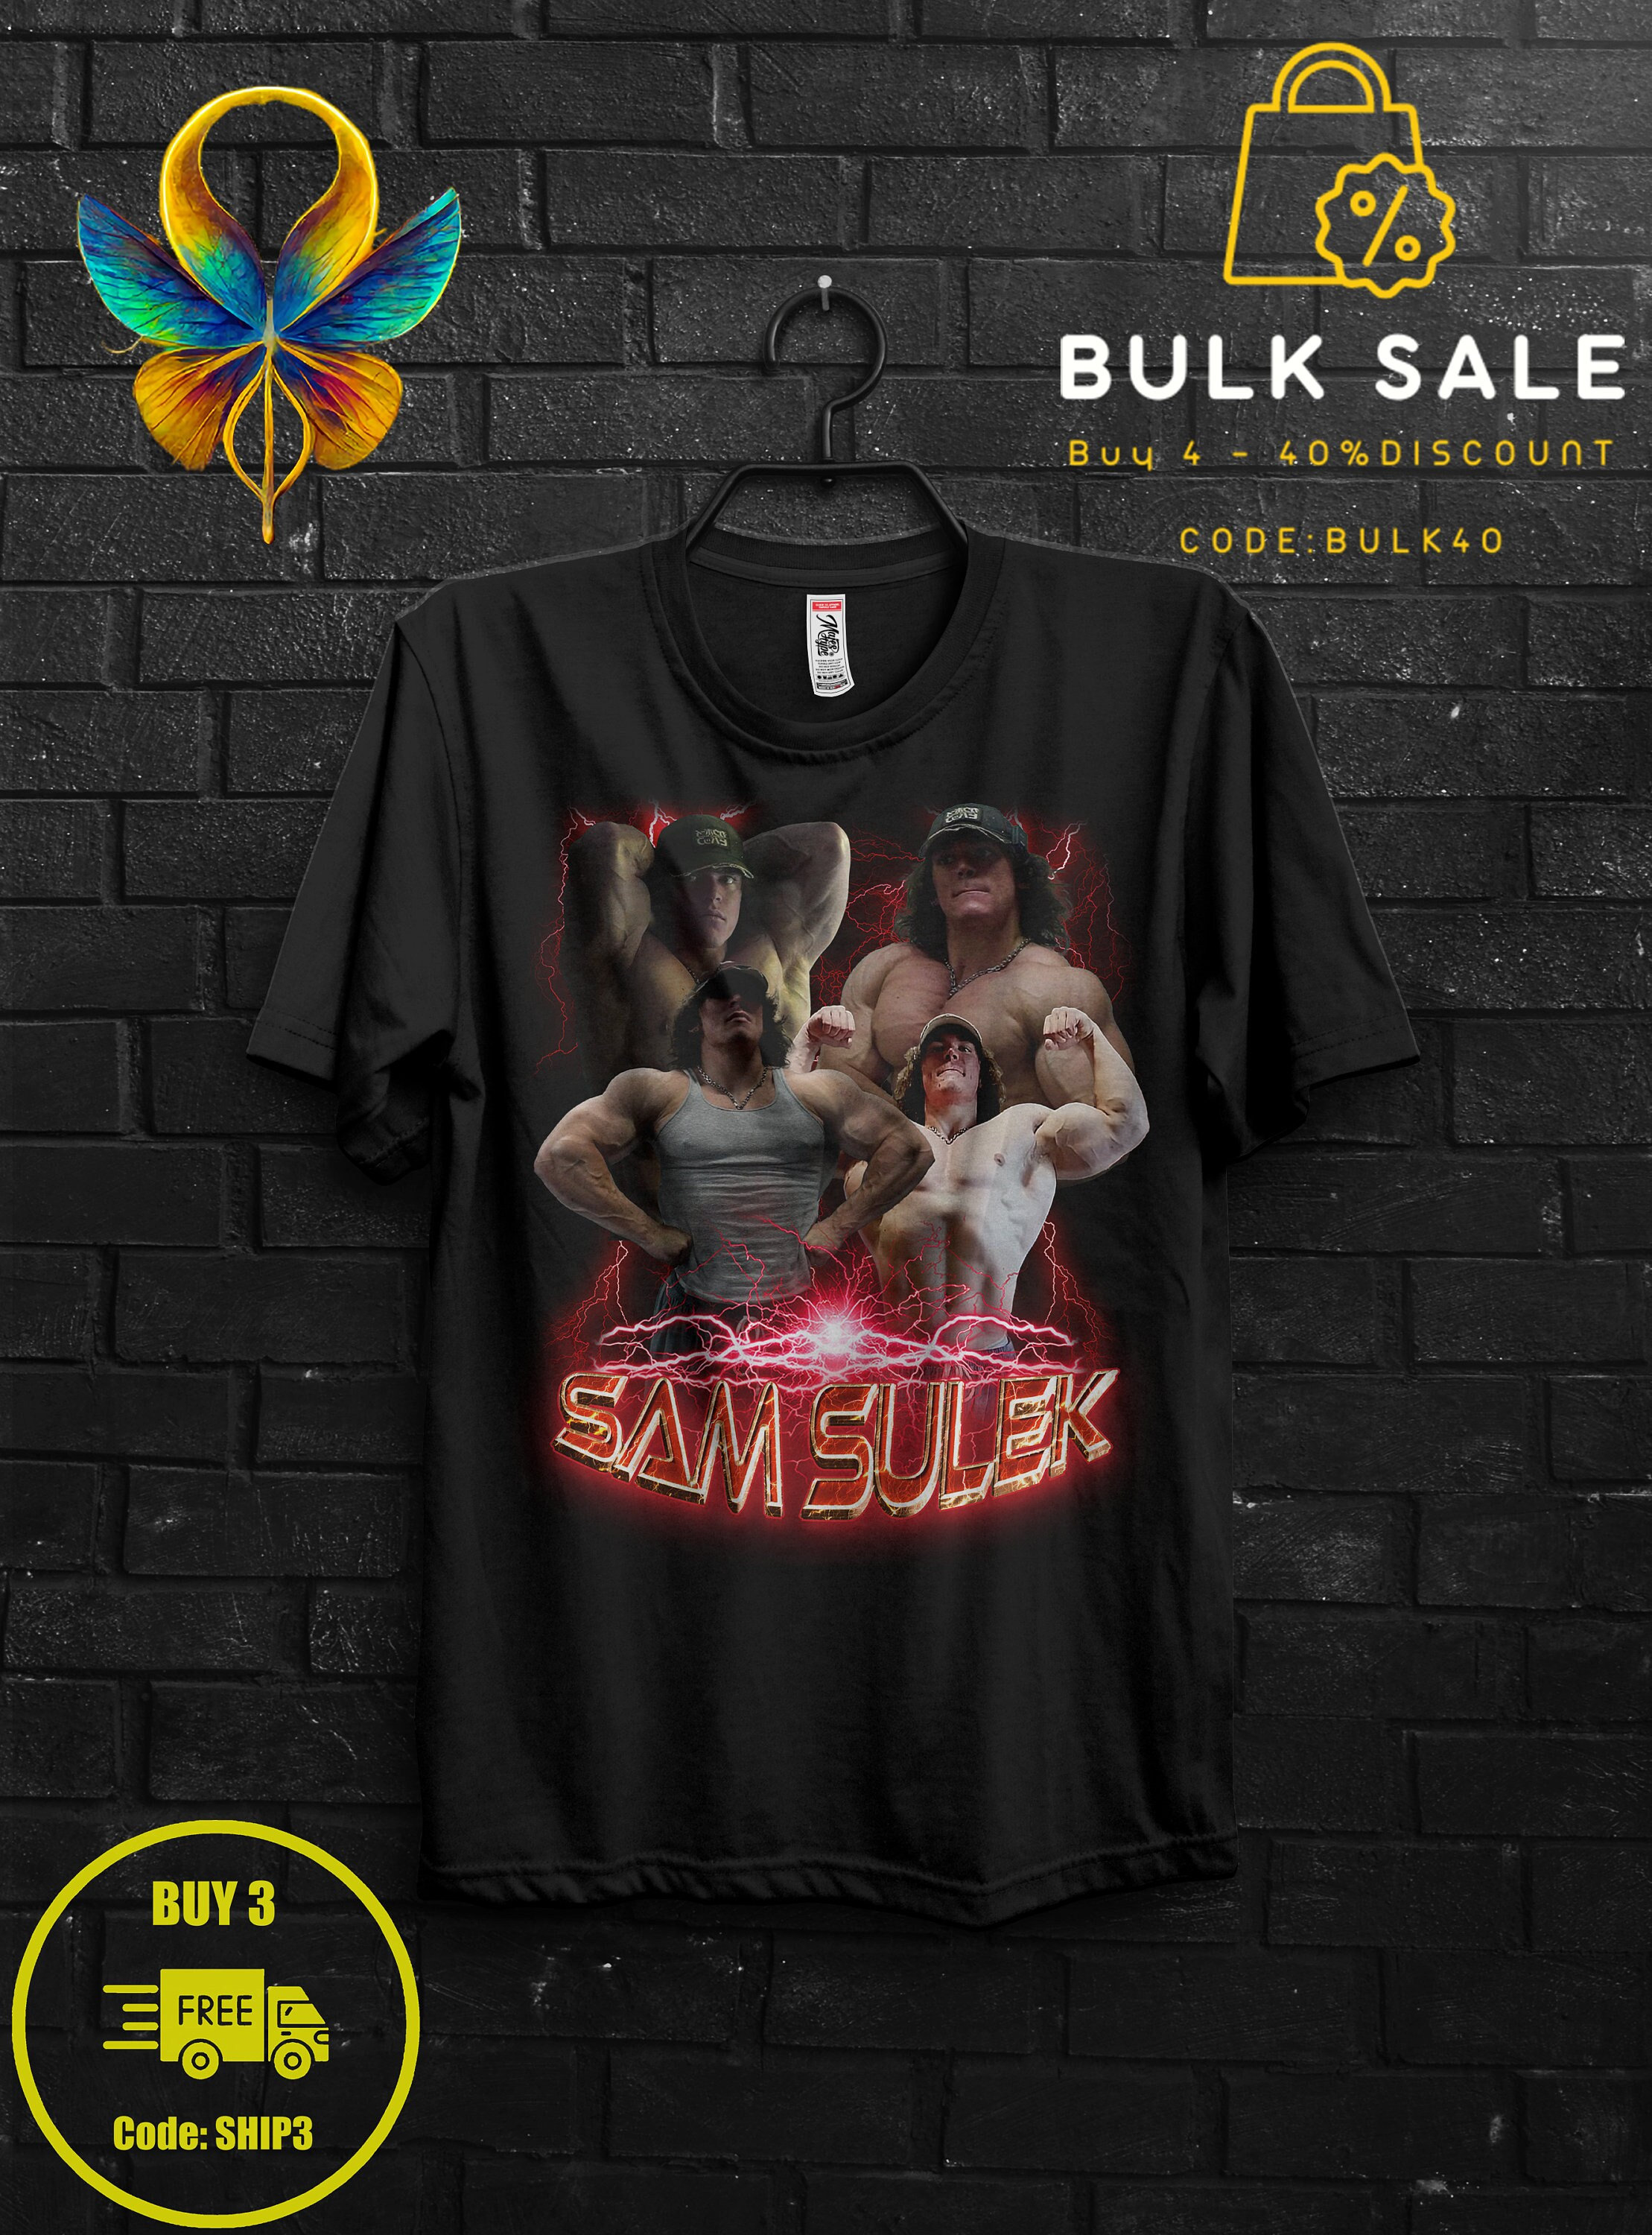 Sam Sulek Oversized Pump Cover Gift For Bodybuilder,Legalize Anabolic Steroids Shirt,Tren Hard Tee,Gym Rats Tee,Gym Bro T-Shirt,Gym Buddy 1561437402